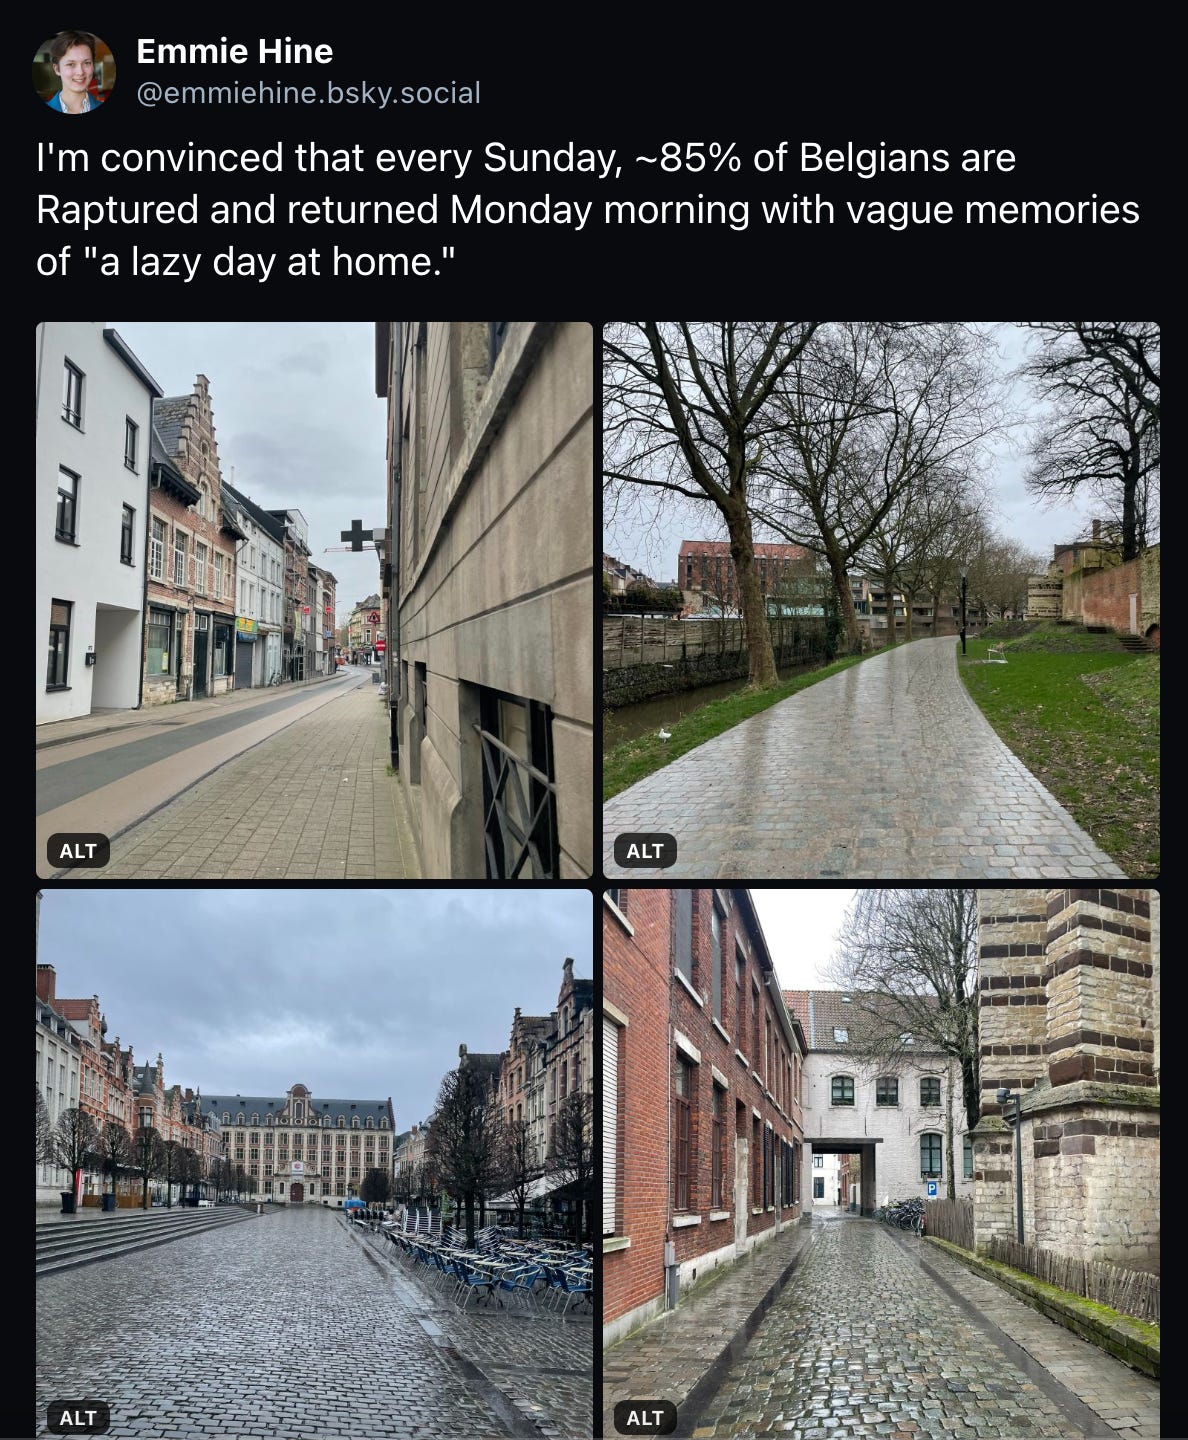 A Bluesky post featuring four pictures of a gray, deserted Leuven and the caption "I'm convinced that every Sunday, ~85% of Belgians are Raptured and returned Monday morning with vague memories of "a lazy day at home.""